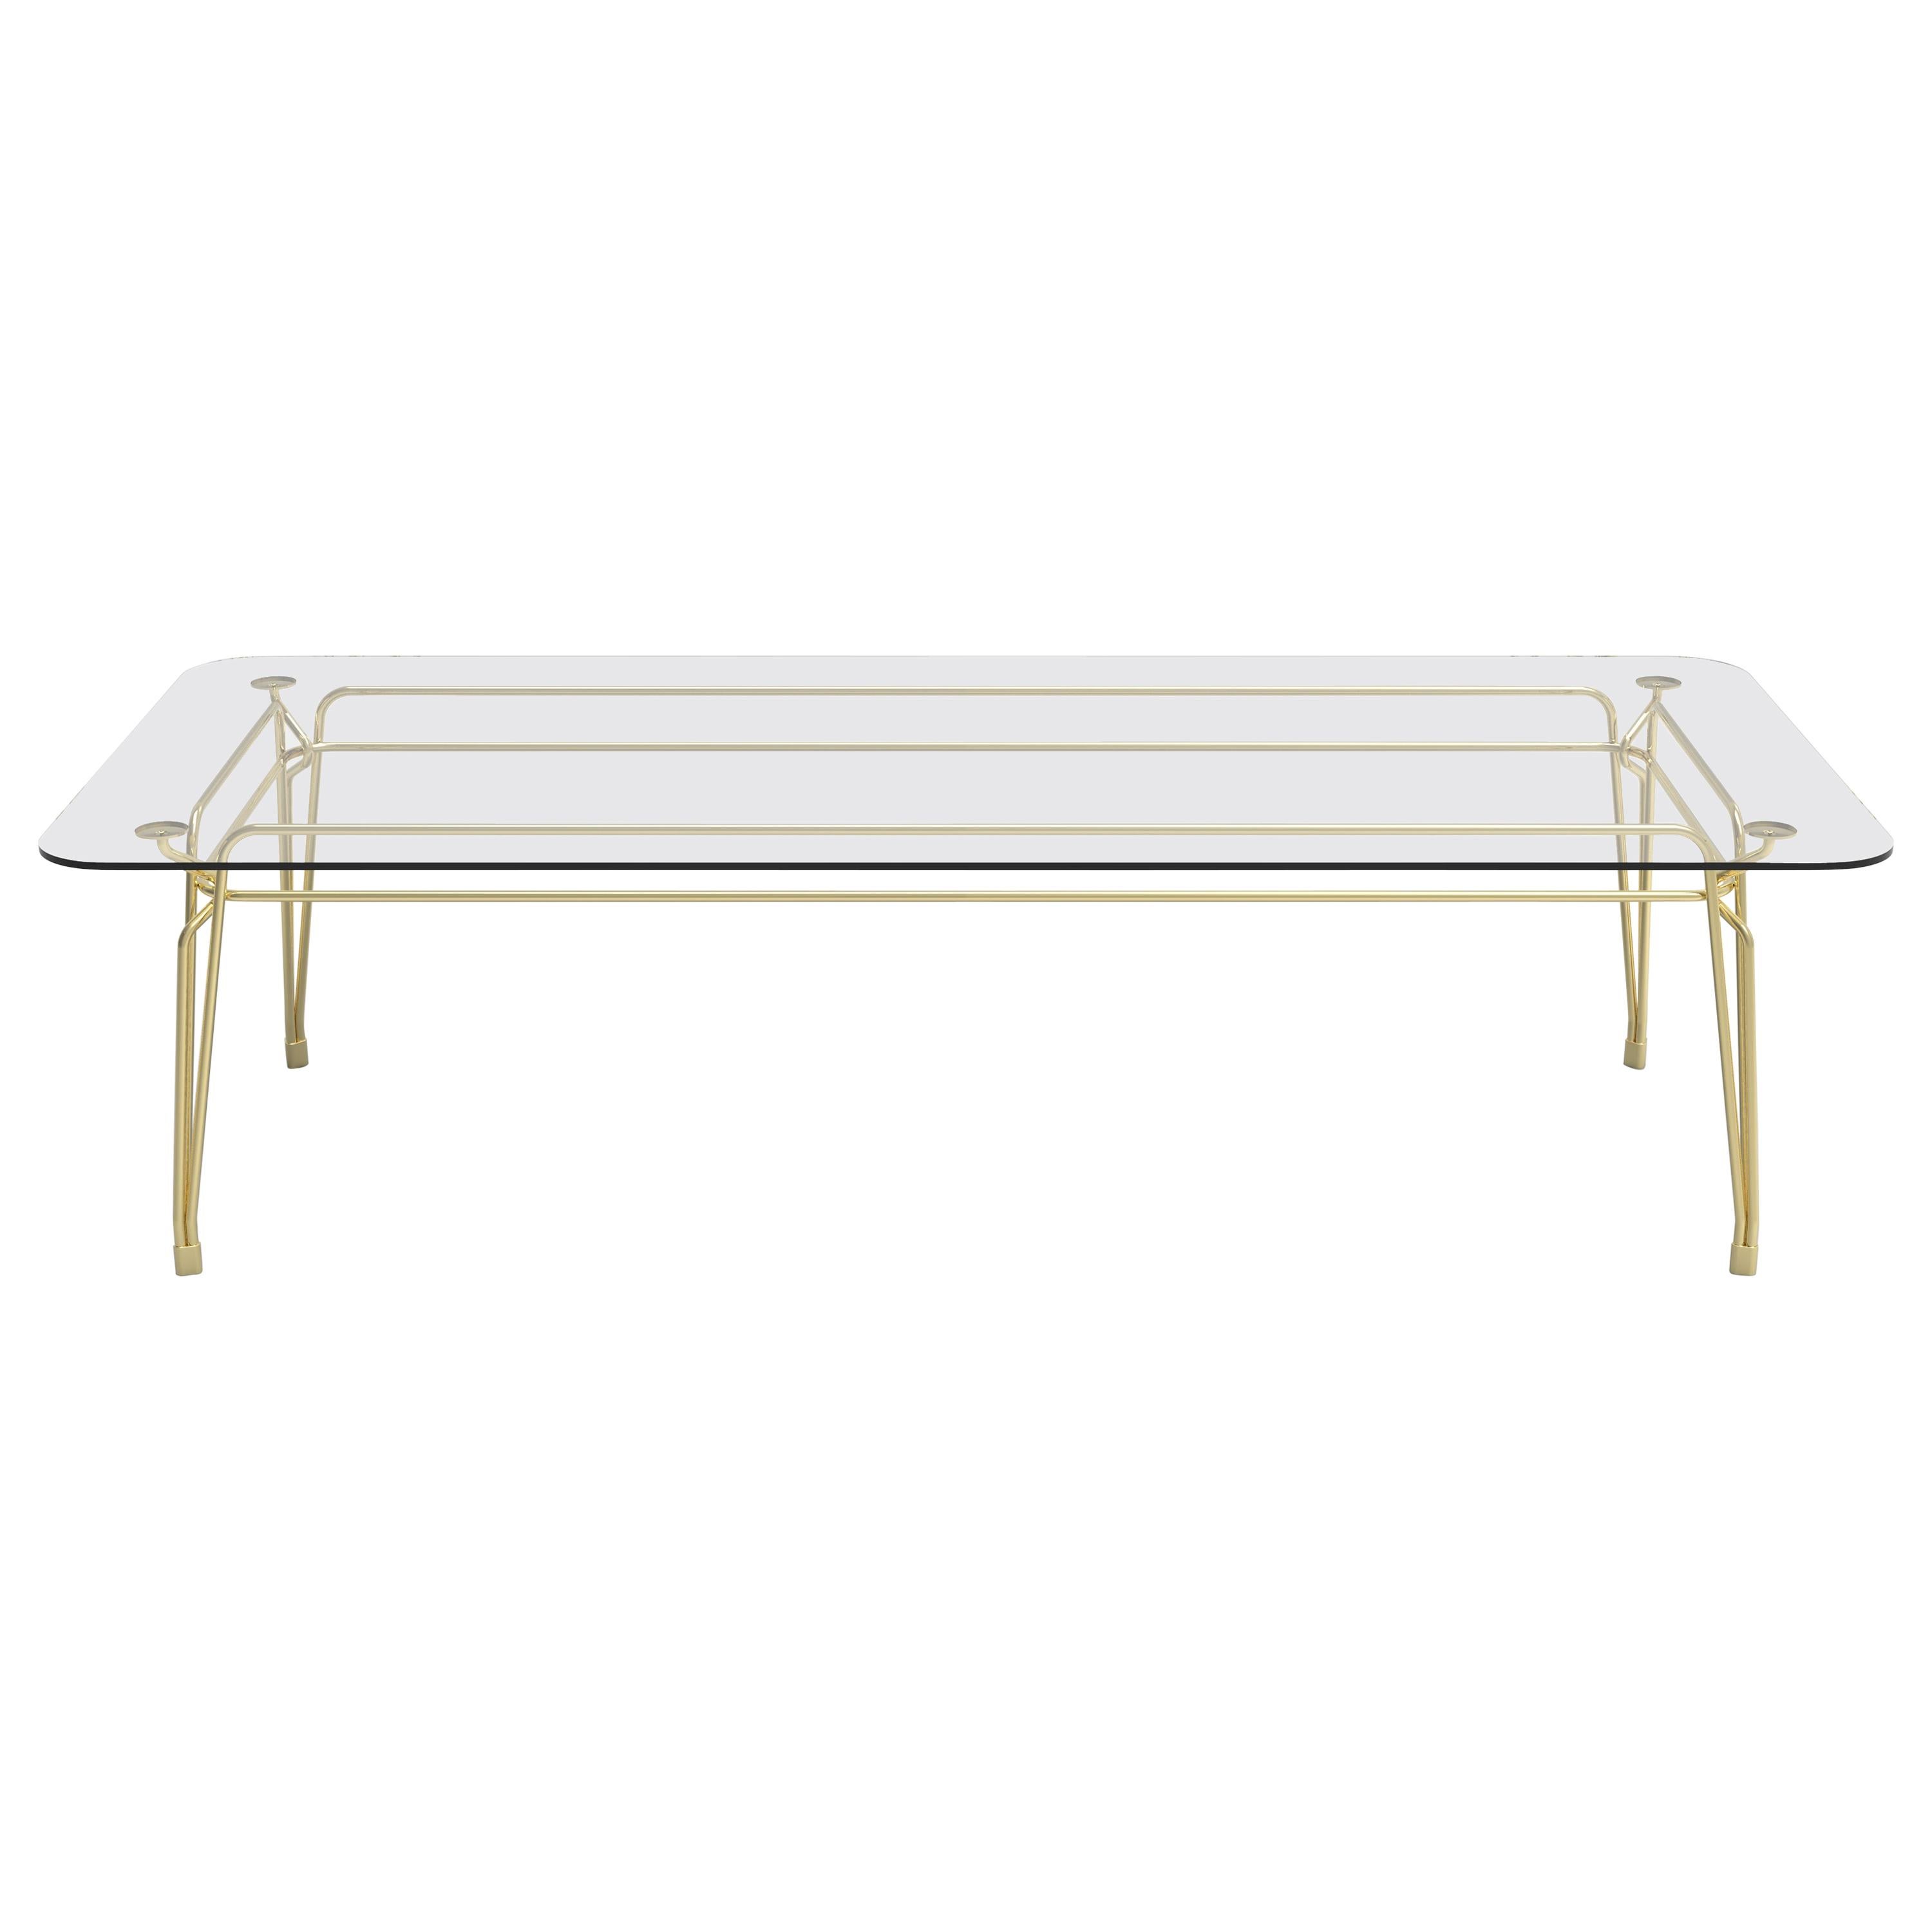 Botany Dining Table in Glass Top with Polished Brass Legs